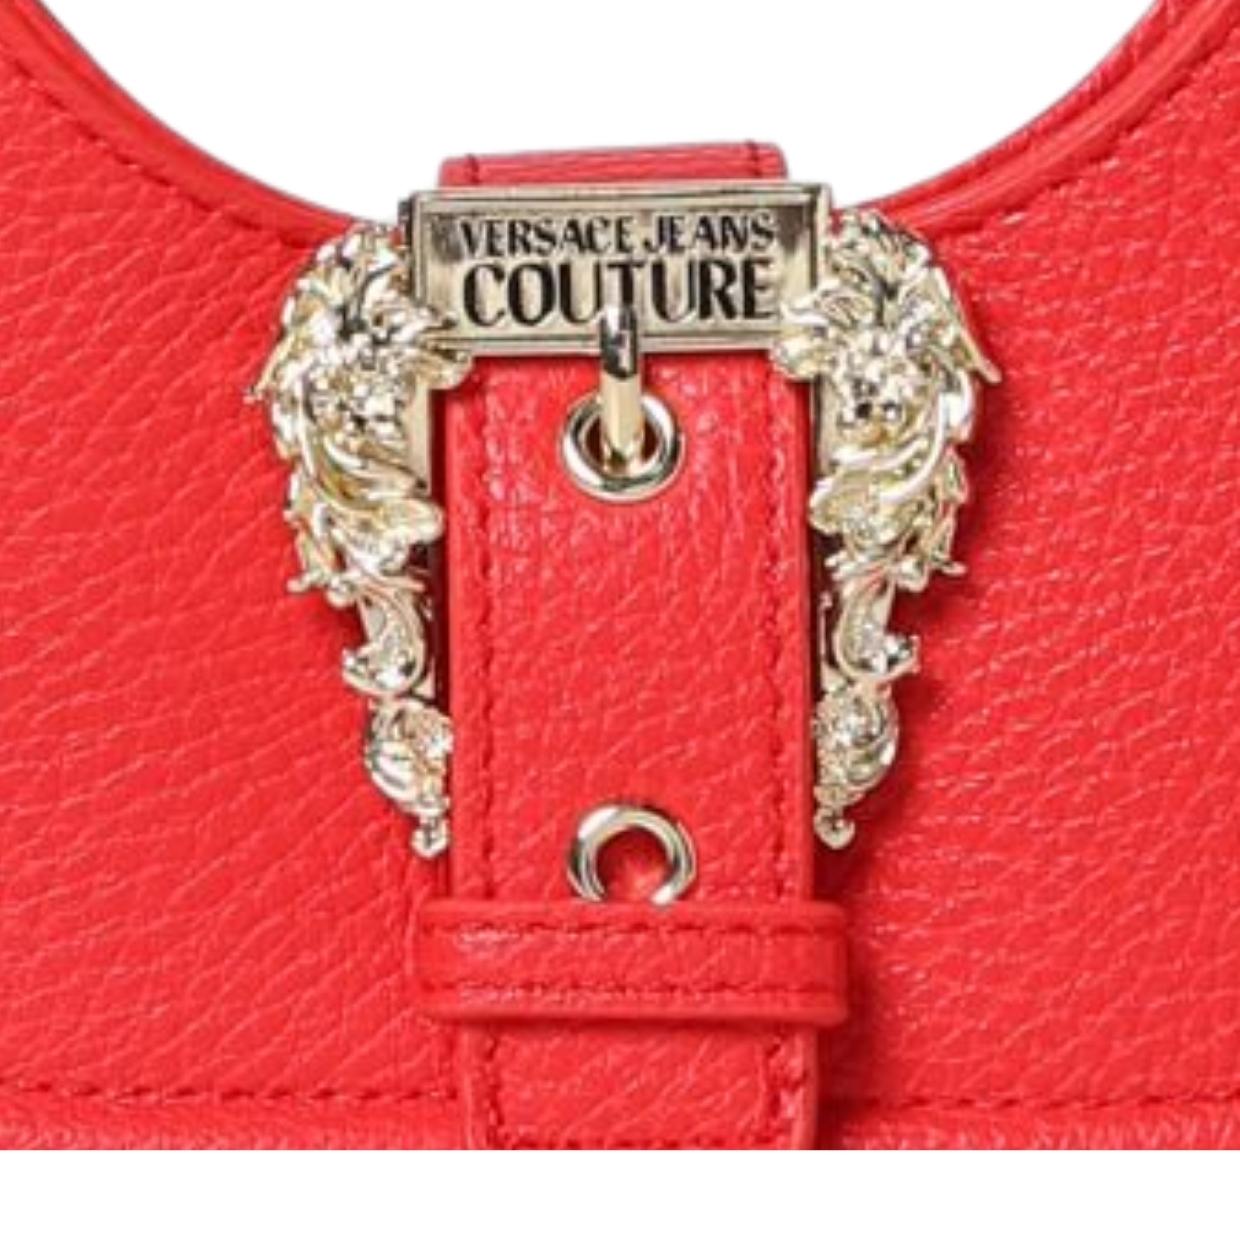 Versace Jeans Couture Buckle Mini Red Crossbody Bags